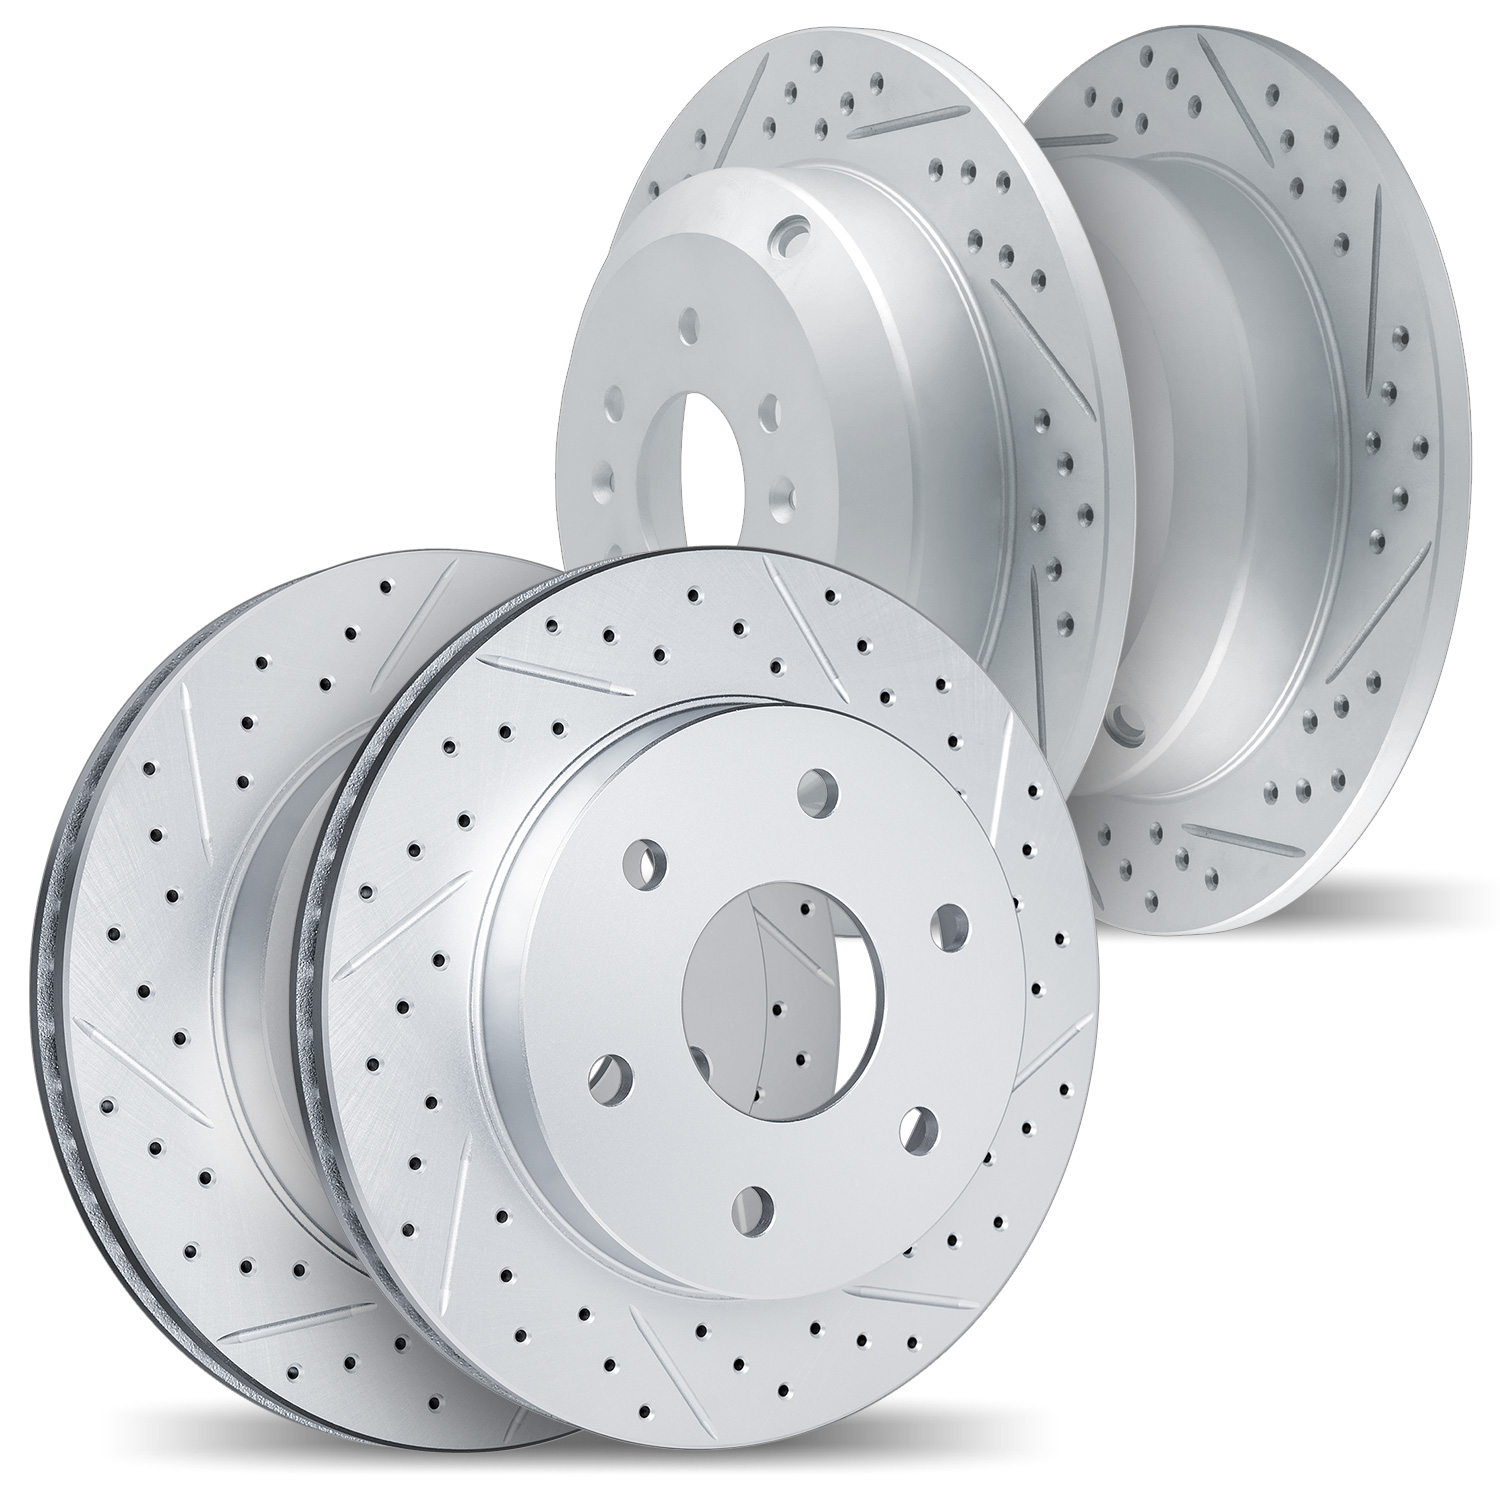 2004-40062 Geoperformance Drilled/Slotted Brake Rotors, Fits Select Multiple Makes/Models, Position: Front and Rear